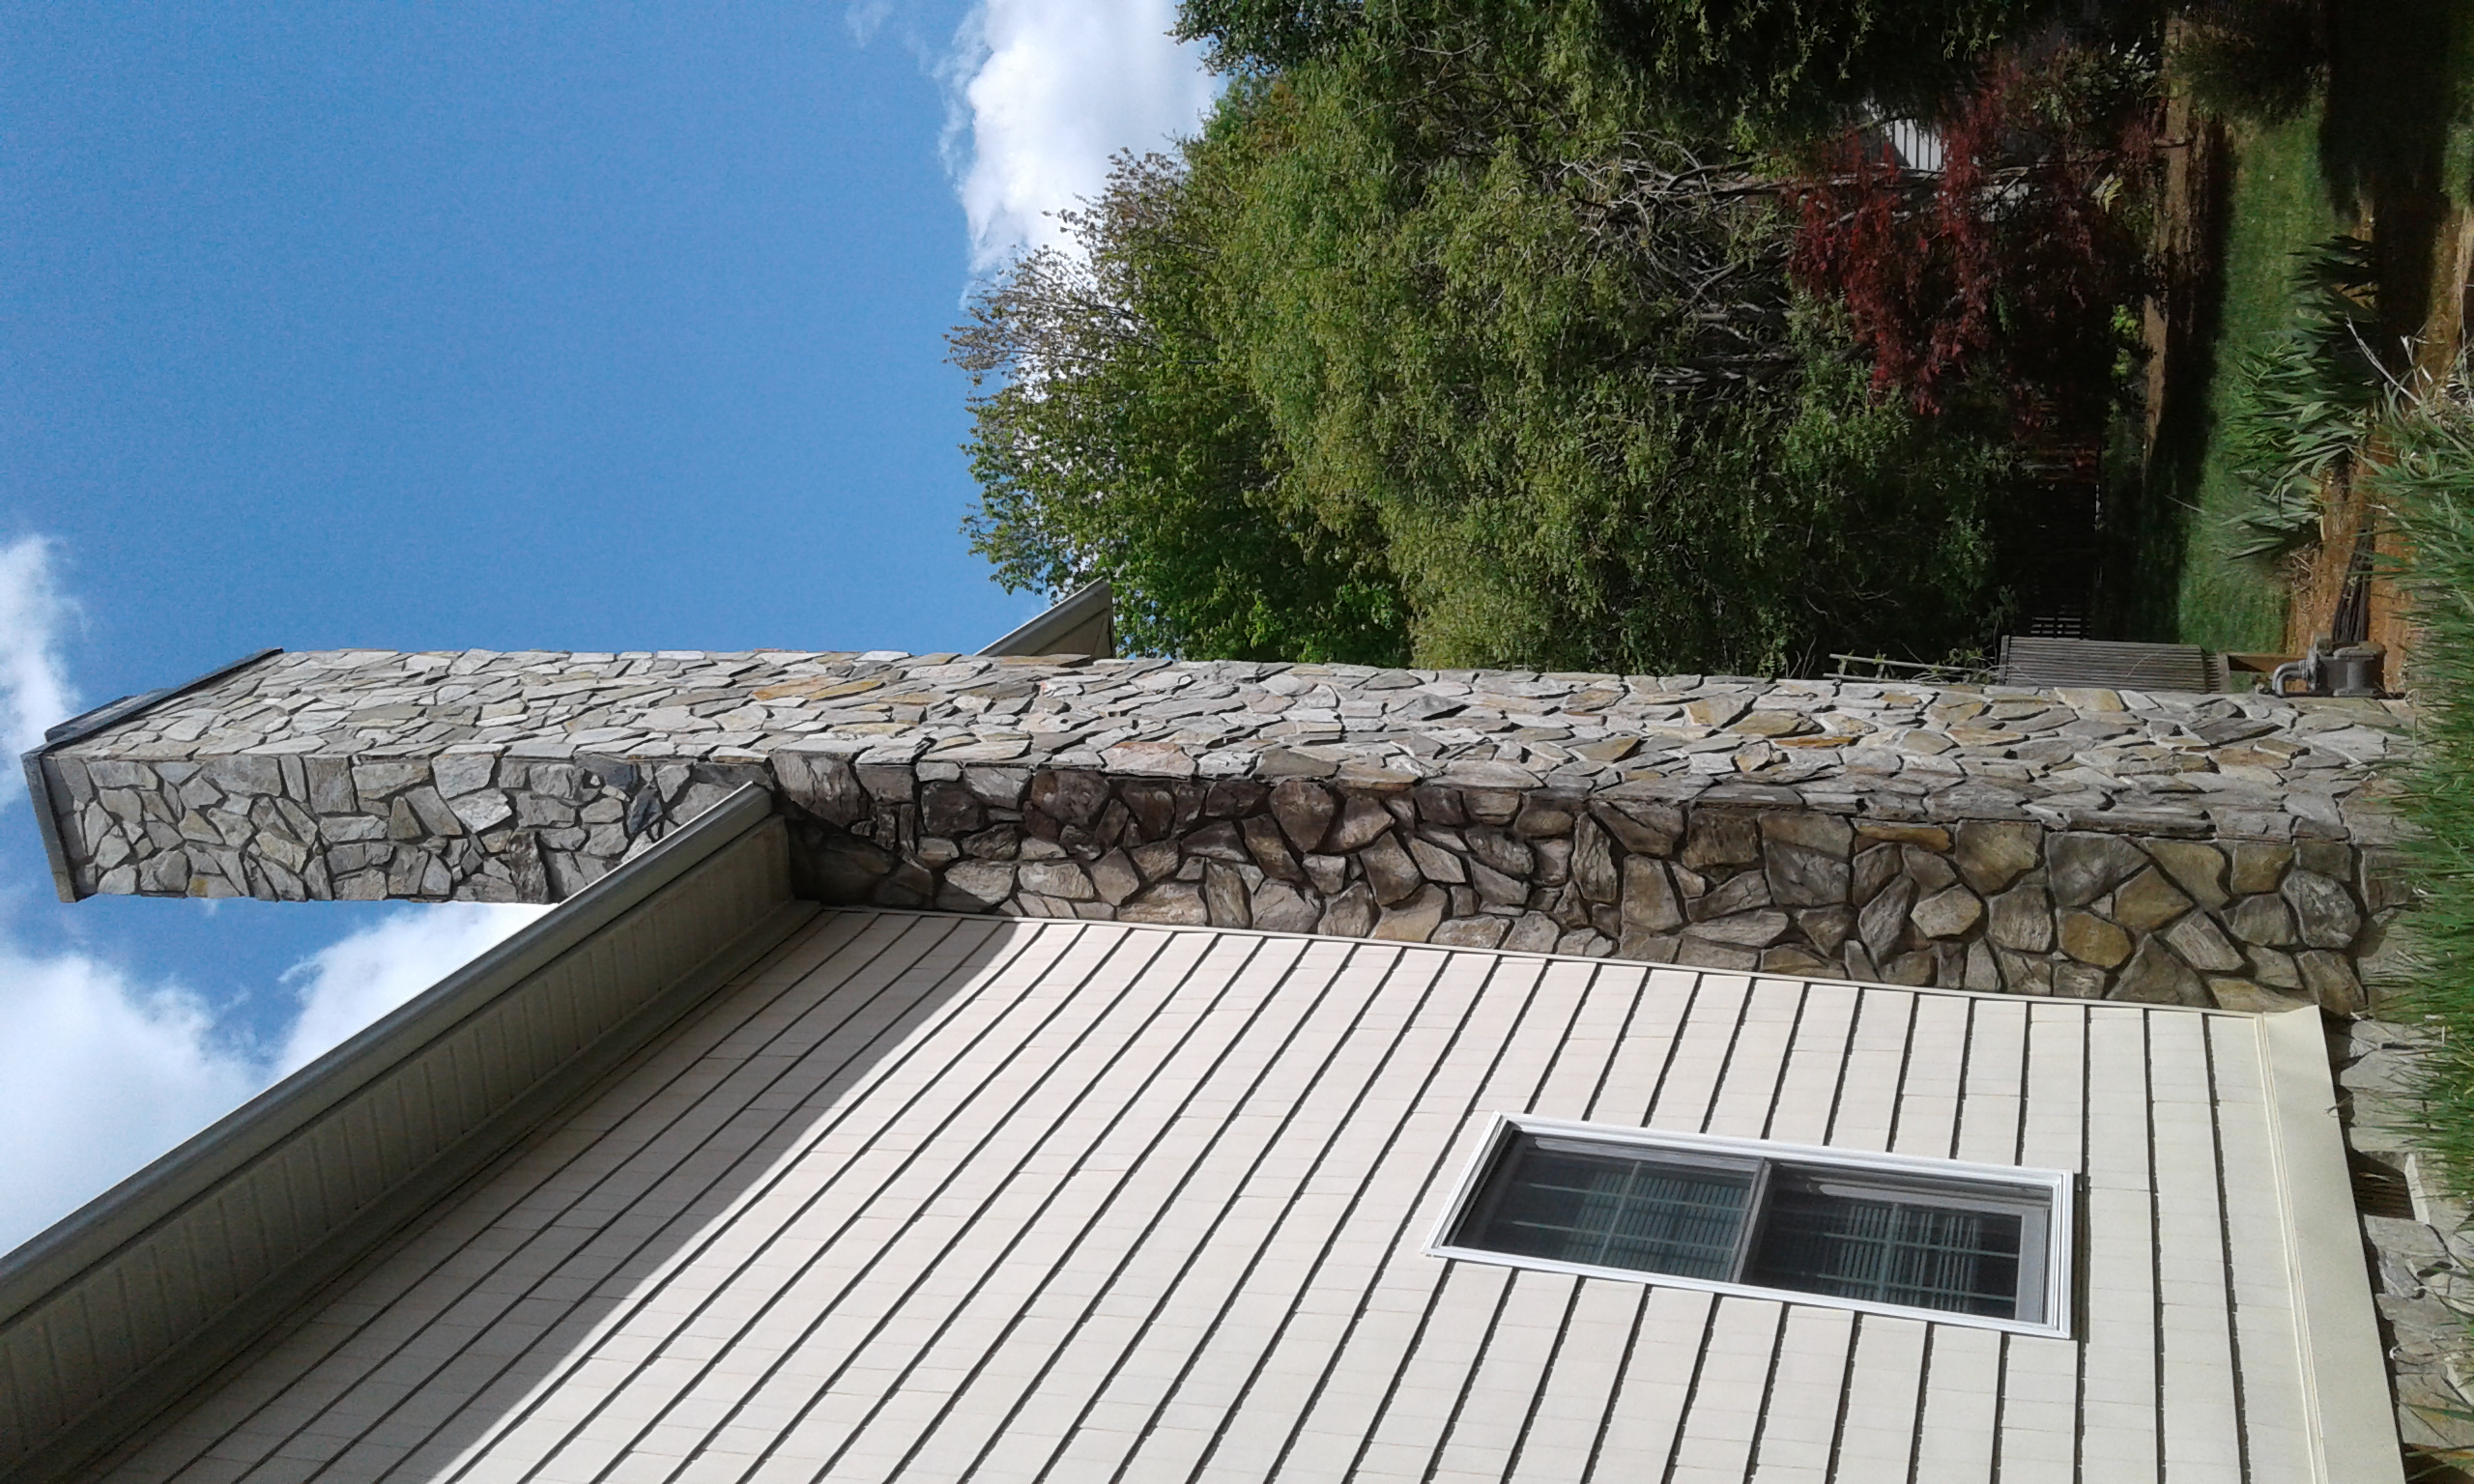 The stone on my chimney got a big crack in it, and the rain started getting in. Bad news. 